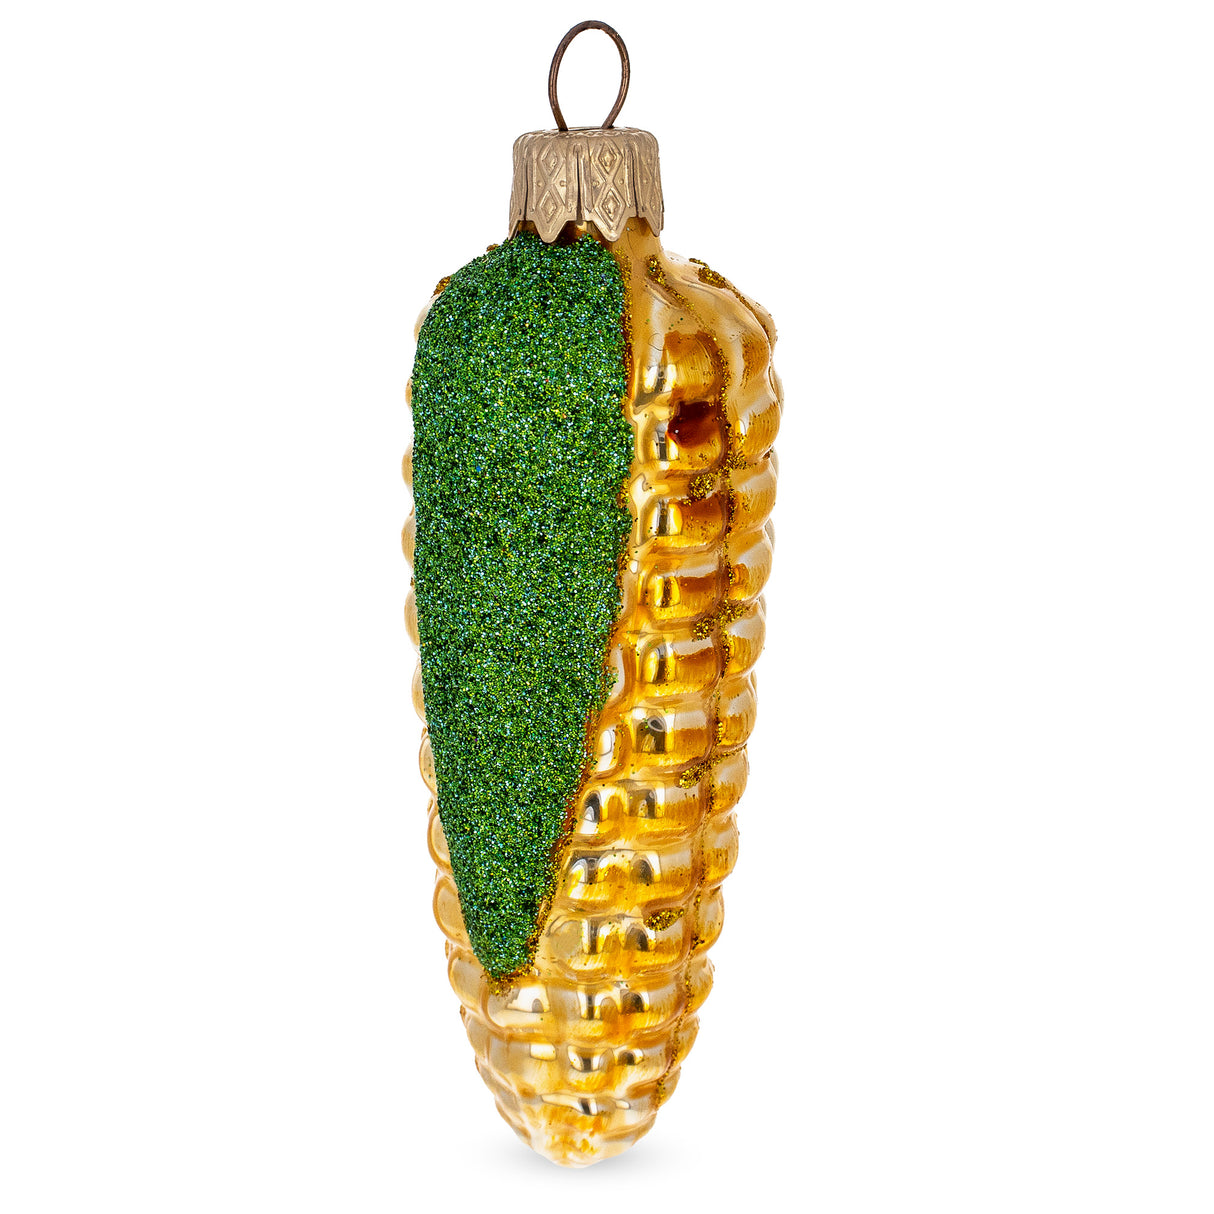 Glass Glittered Corn on the Cob Glass Christmas Ornament in Yellow color